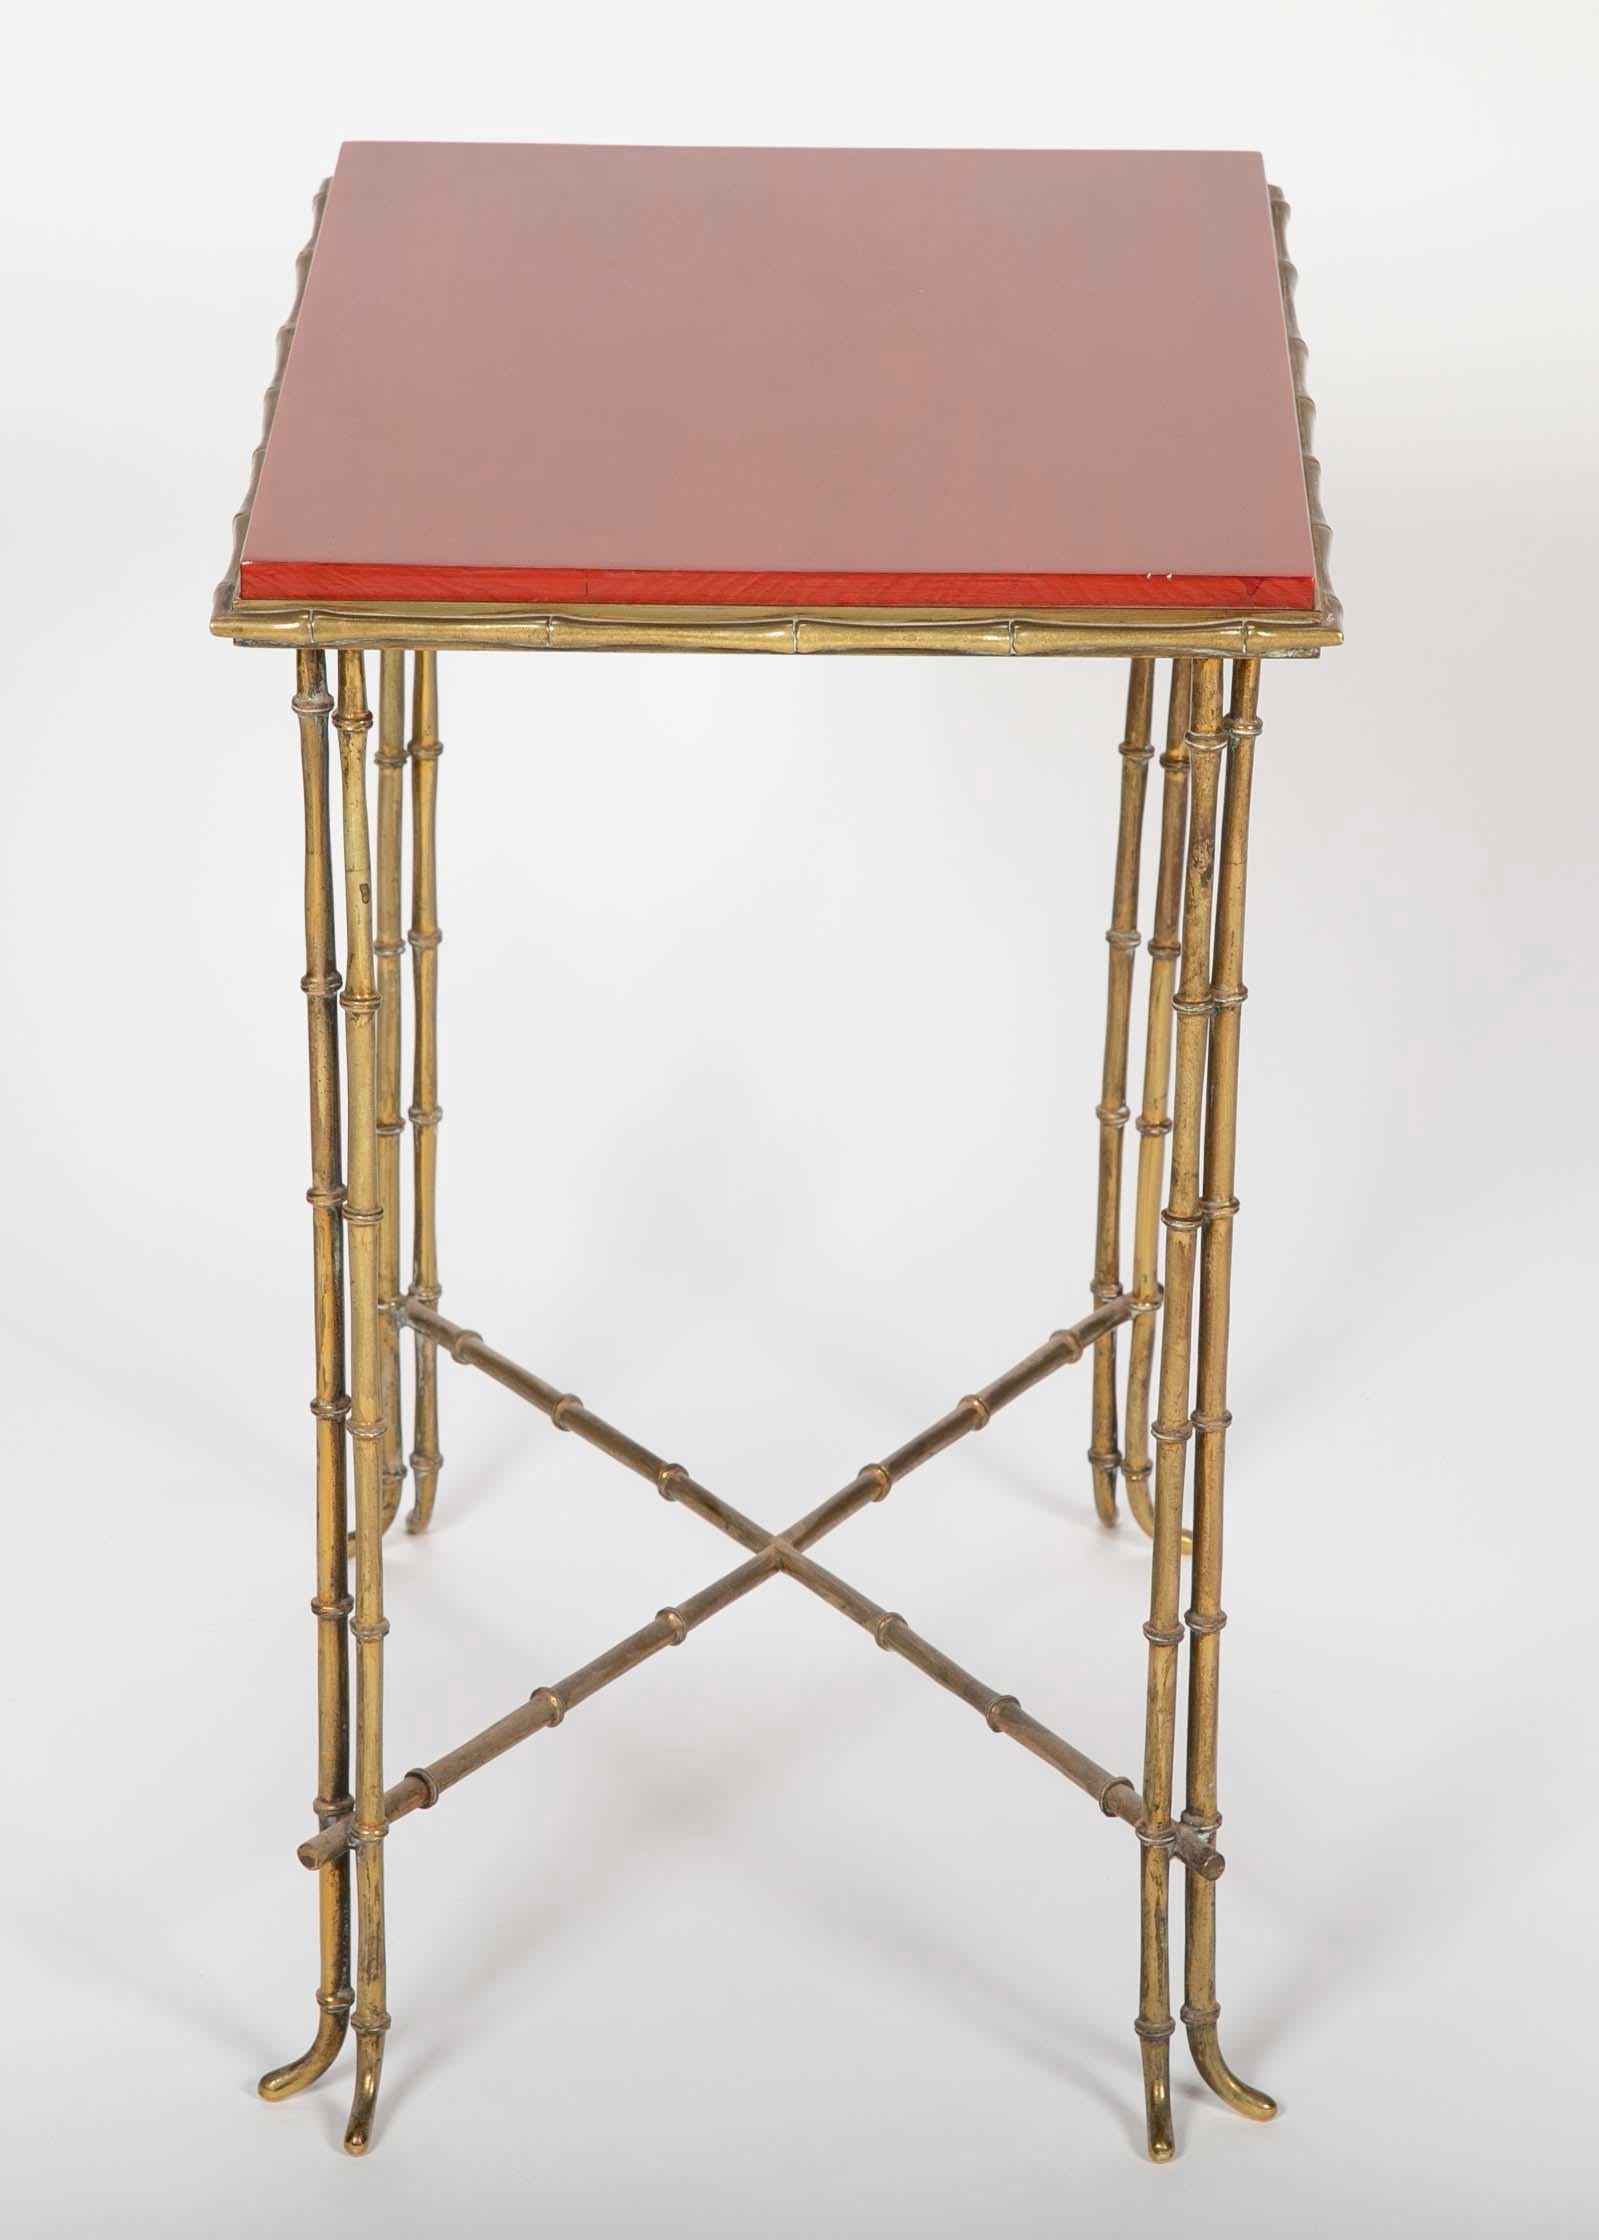 Brass Bamboo Form Cocktail Table by Bagues with Red Lacquered Wood Top 1